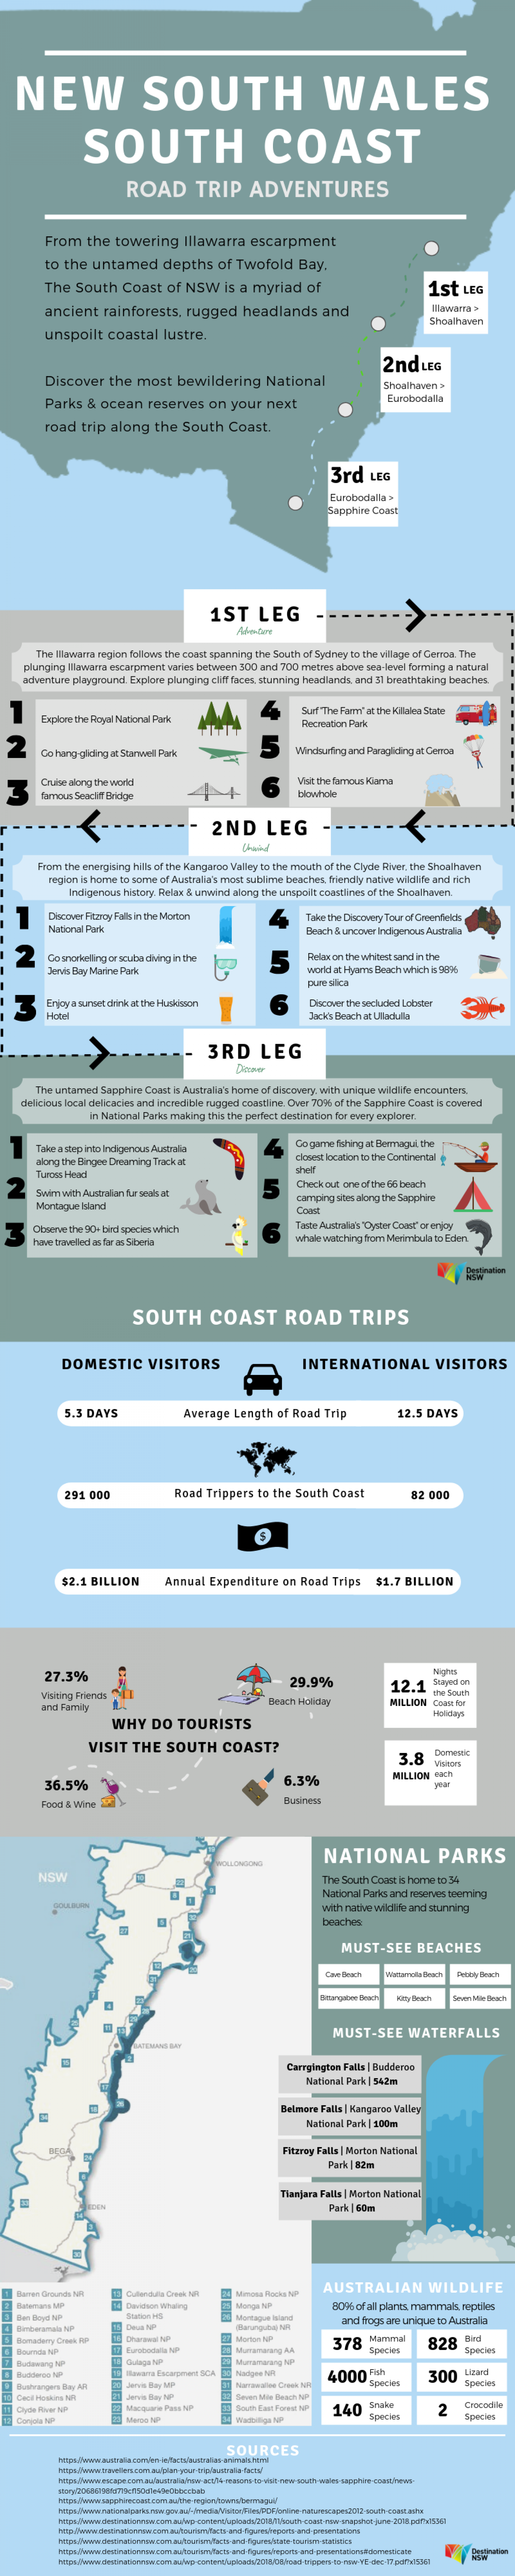 NSW South Coast - Road Trip Adventures Infographic